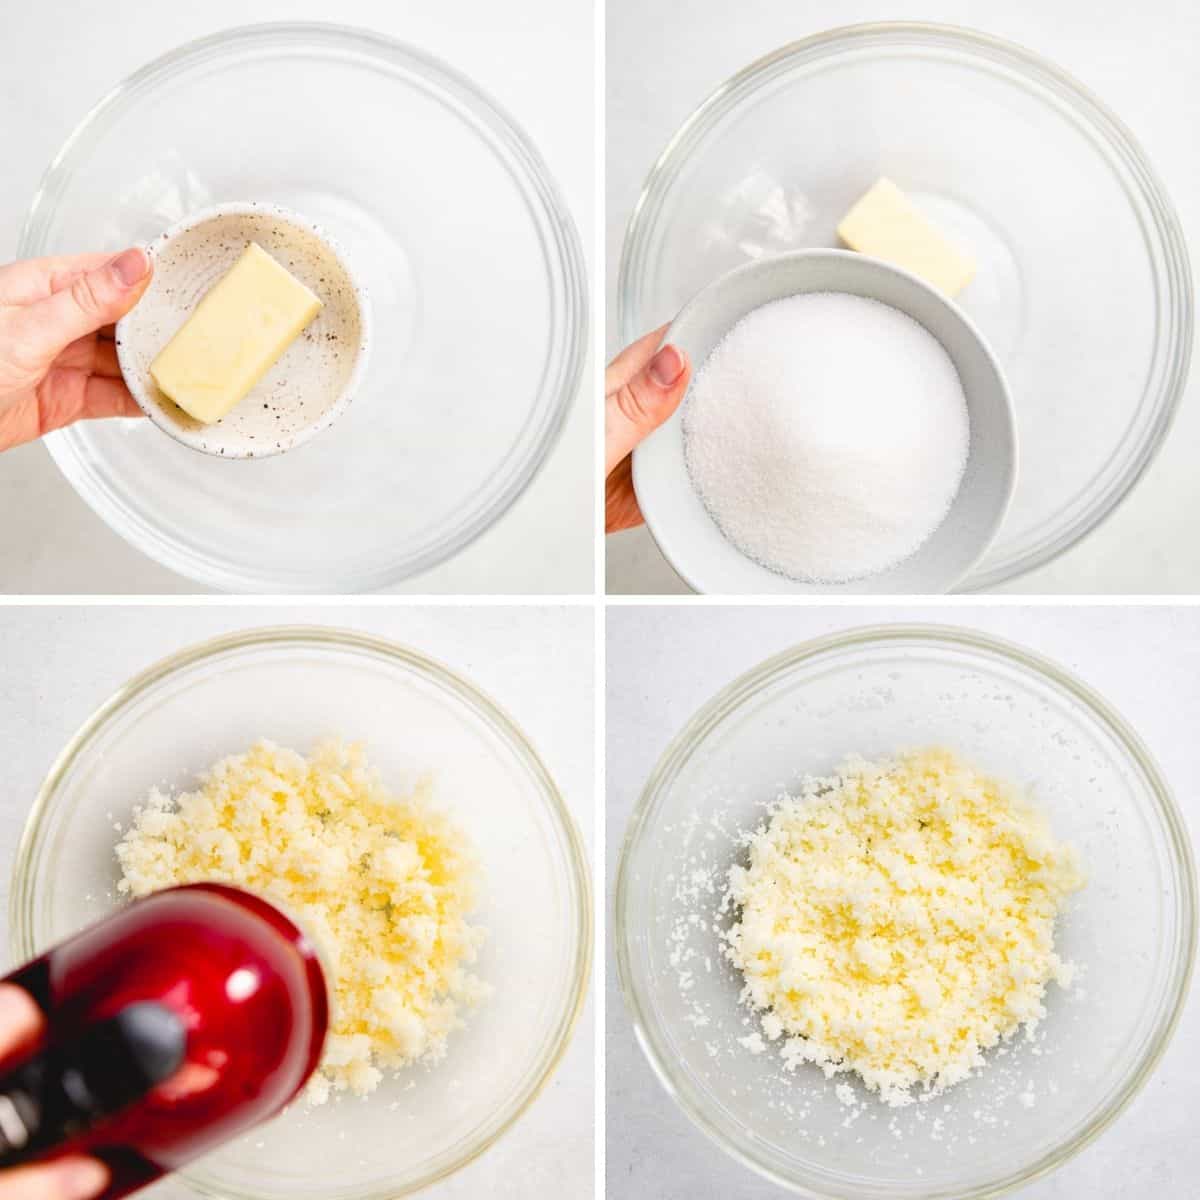 Process photos of mixing butter and sugar with a hand mixer.